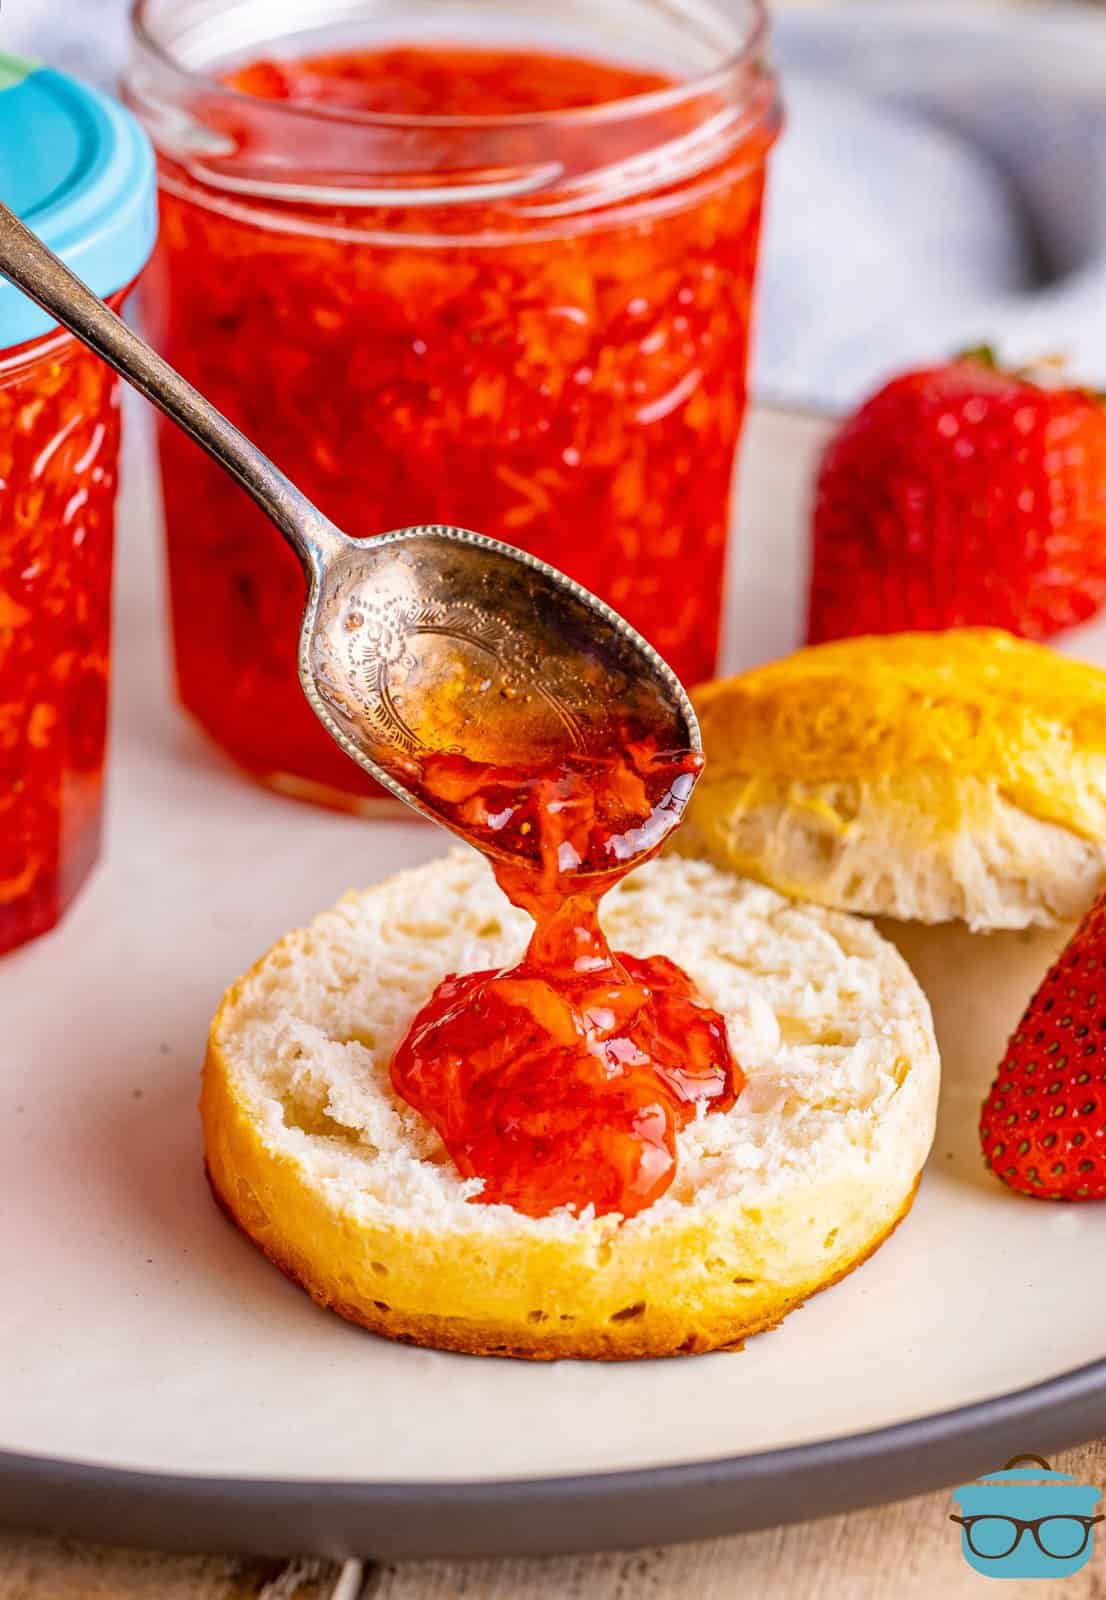 A spoon pouring some strawberry jam on the biscuit.